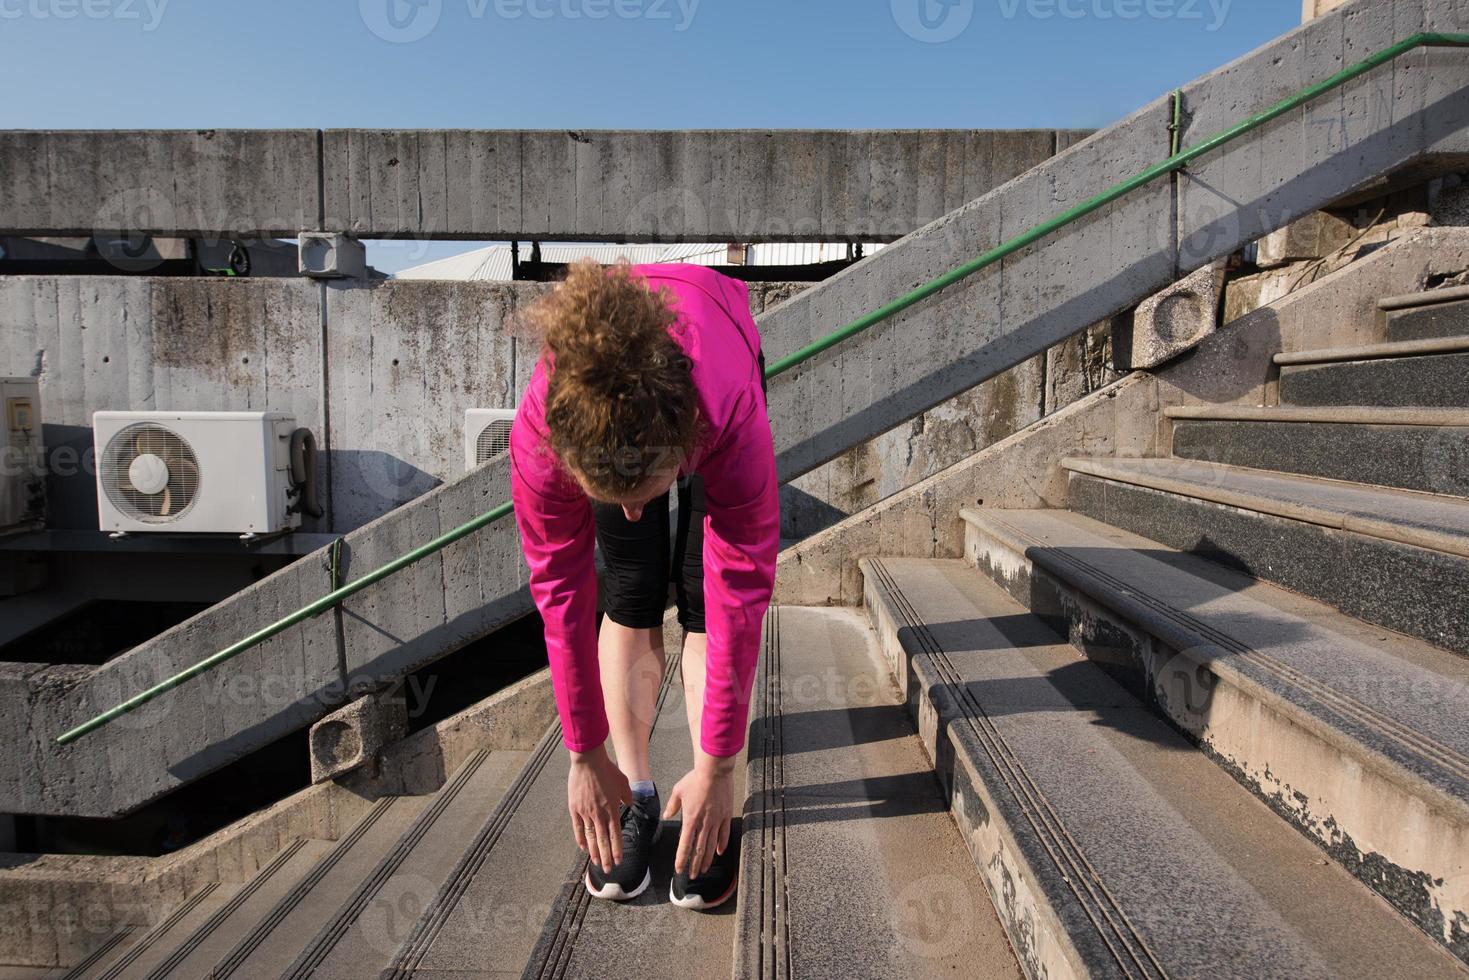 woman  stretching before morning jogging photo